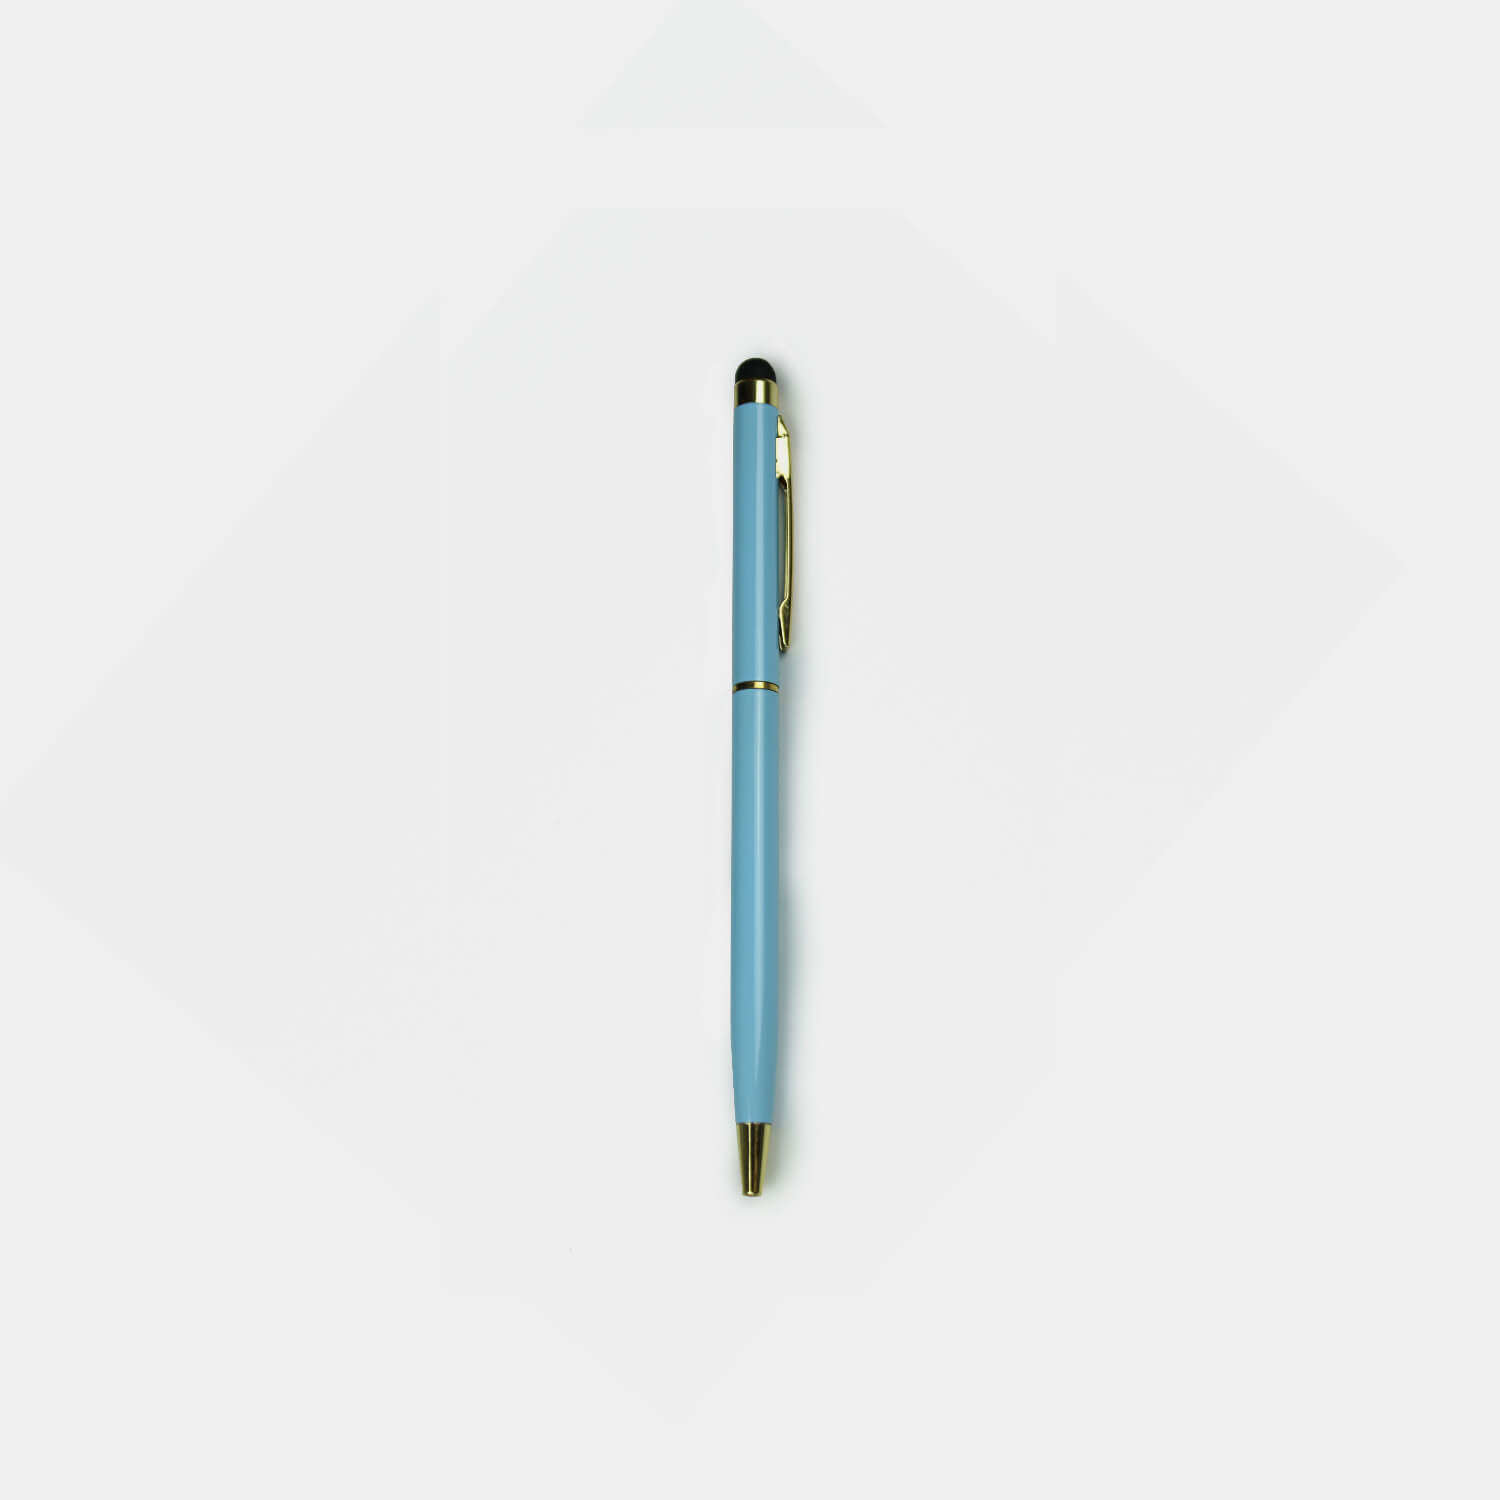 Slim ballpoint pen with aluminium alloy, metal alloy and rubber stylus, black and blue inc. Engraved with your company logo